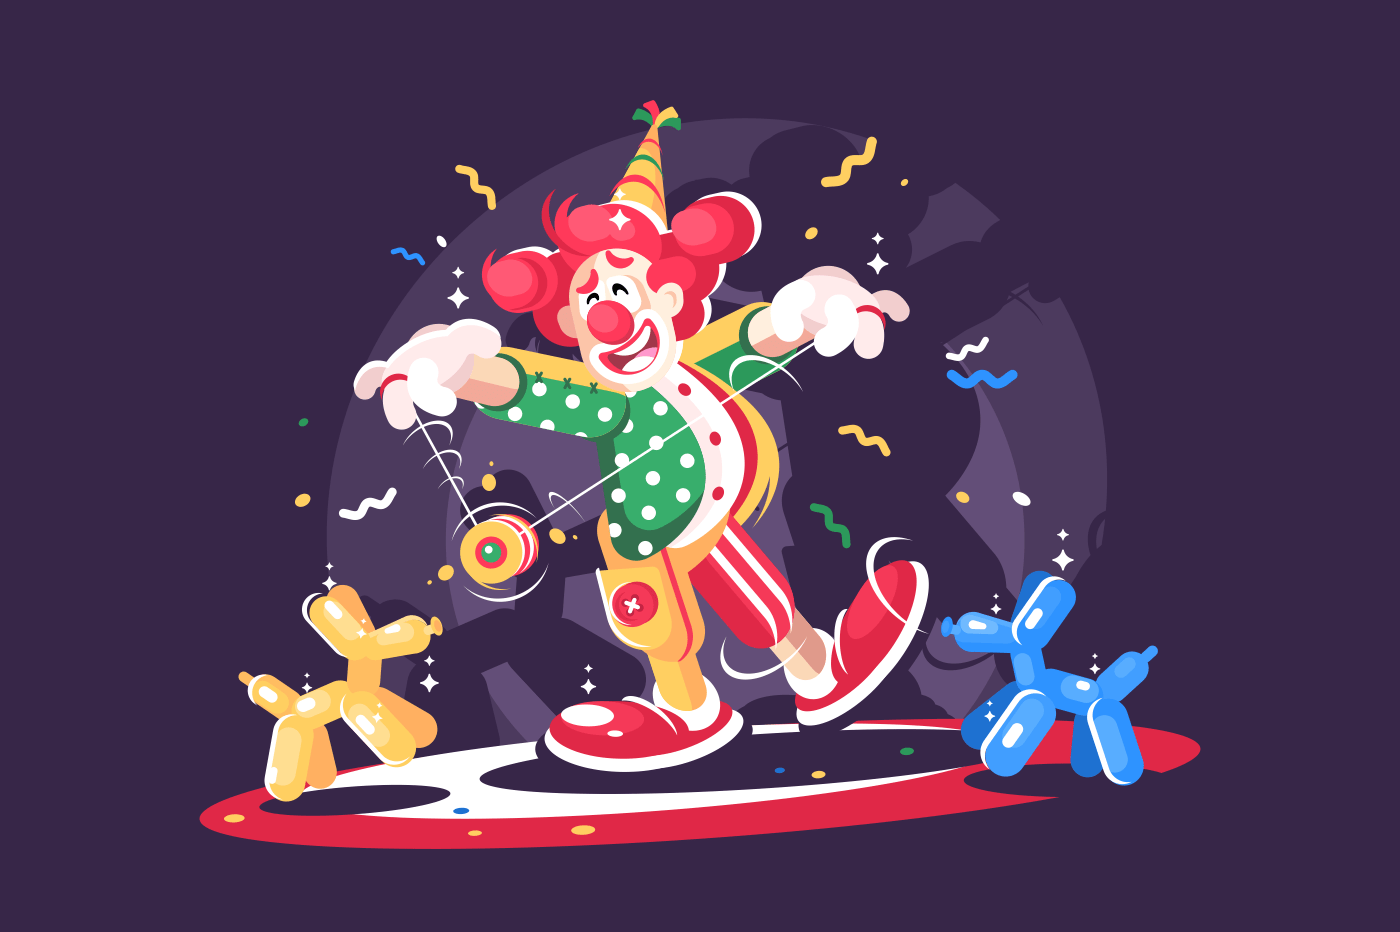 Circus show with cute clown and balloon animals. Comedian cartoon character. Flat. Vector illustration.